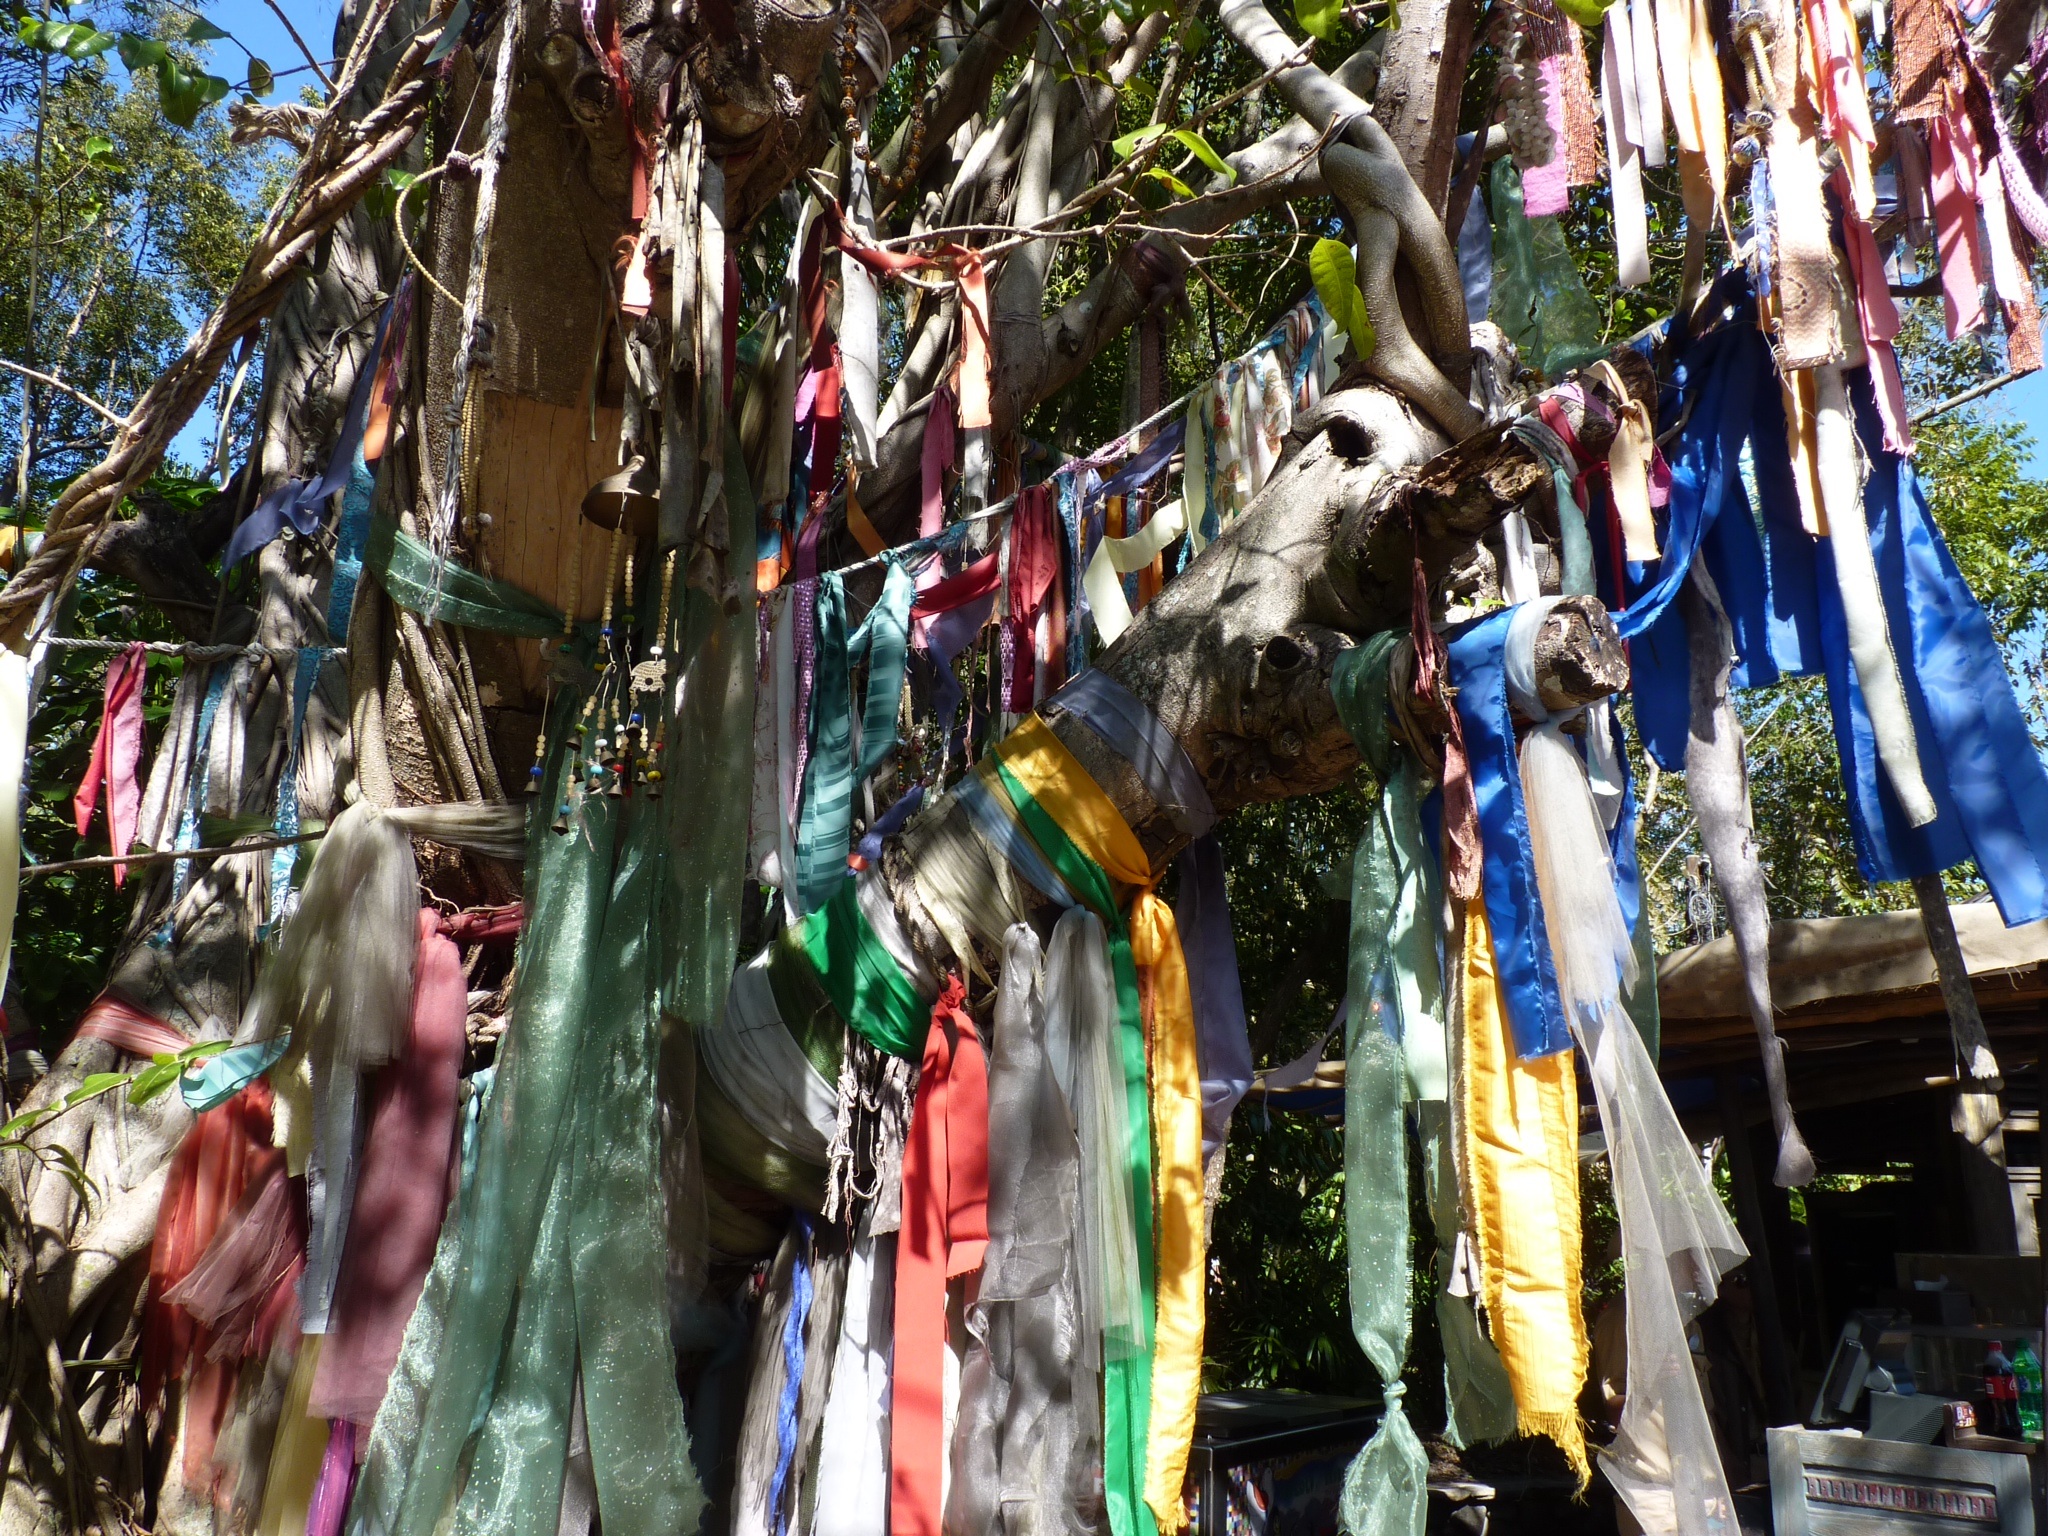 this is many ties on a tree outside